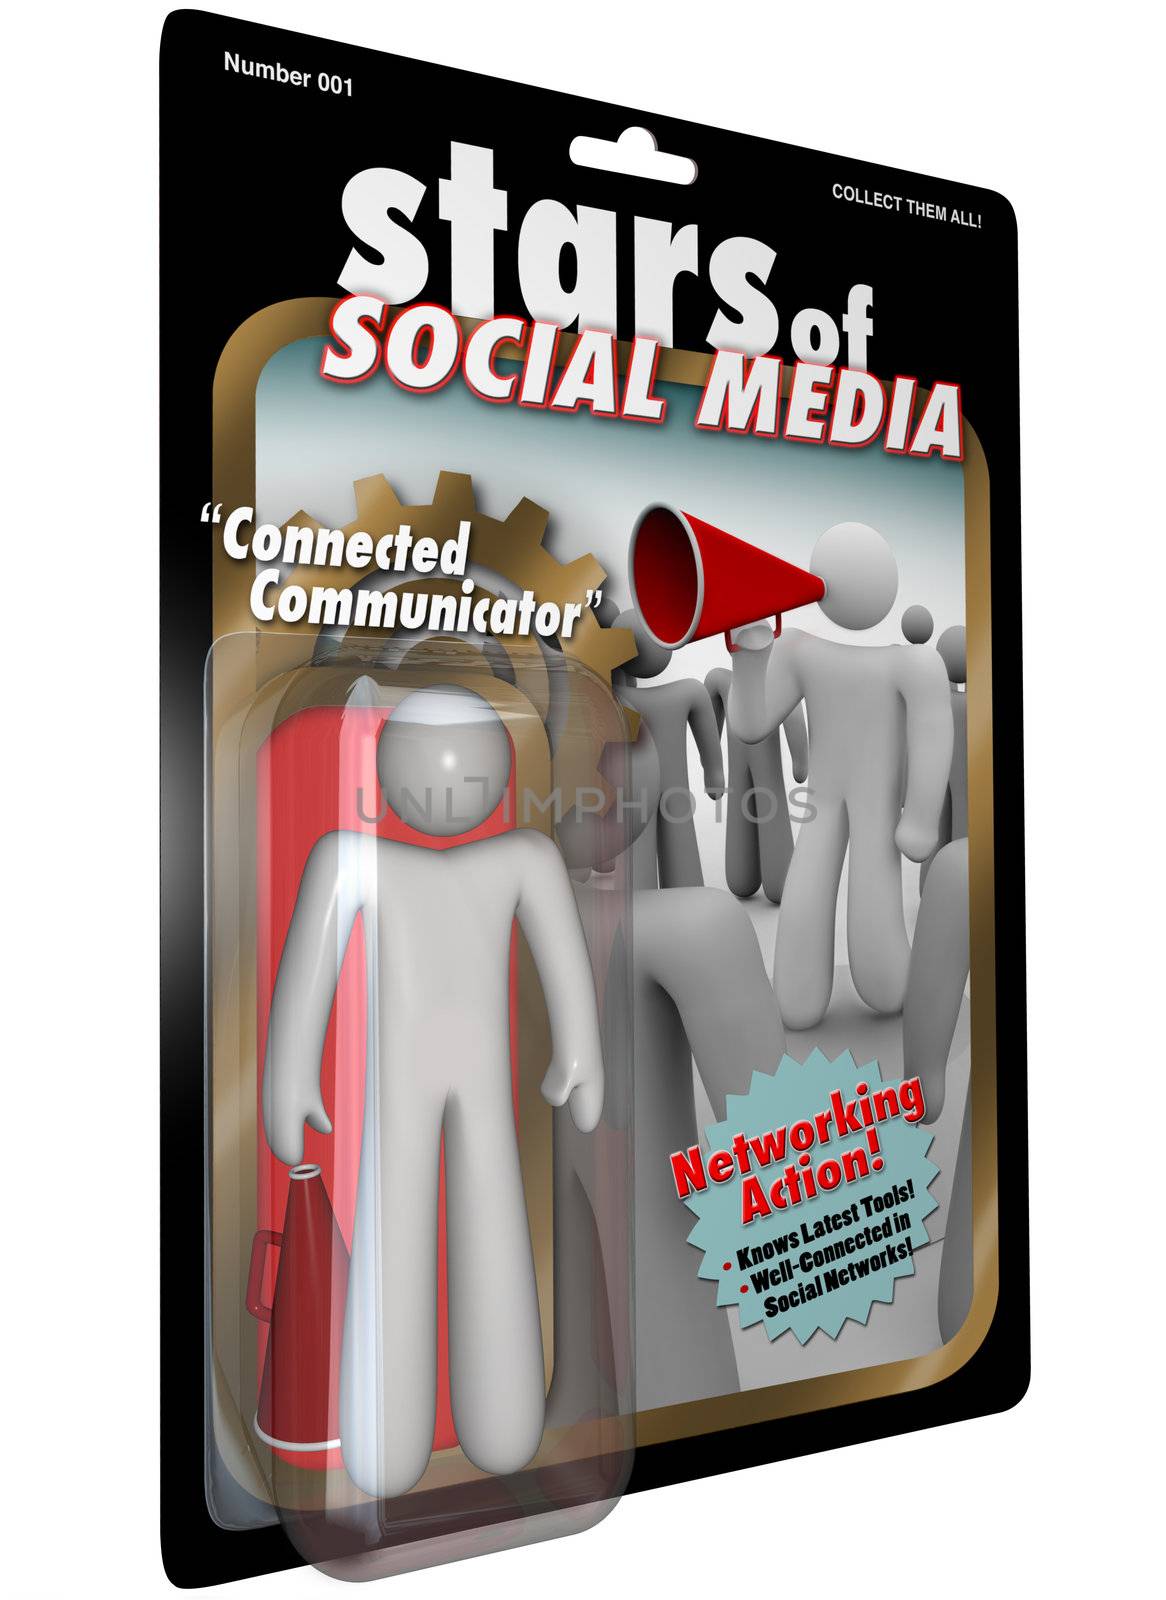 Stars of Social Media Action Figure man with bullhorn using the latest social networking tools and websites to communicate a message and build connections